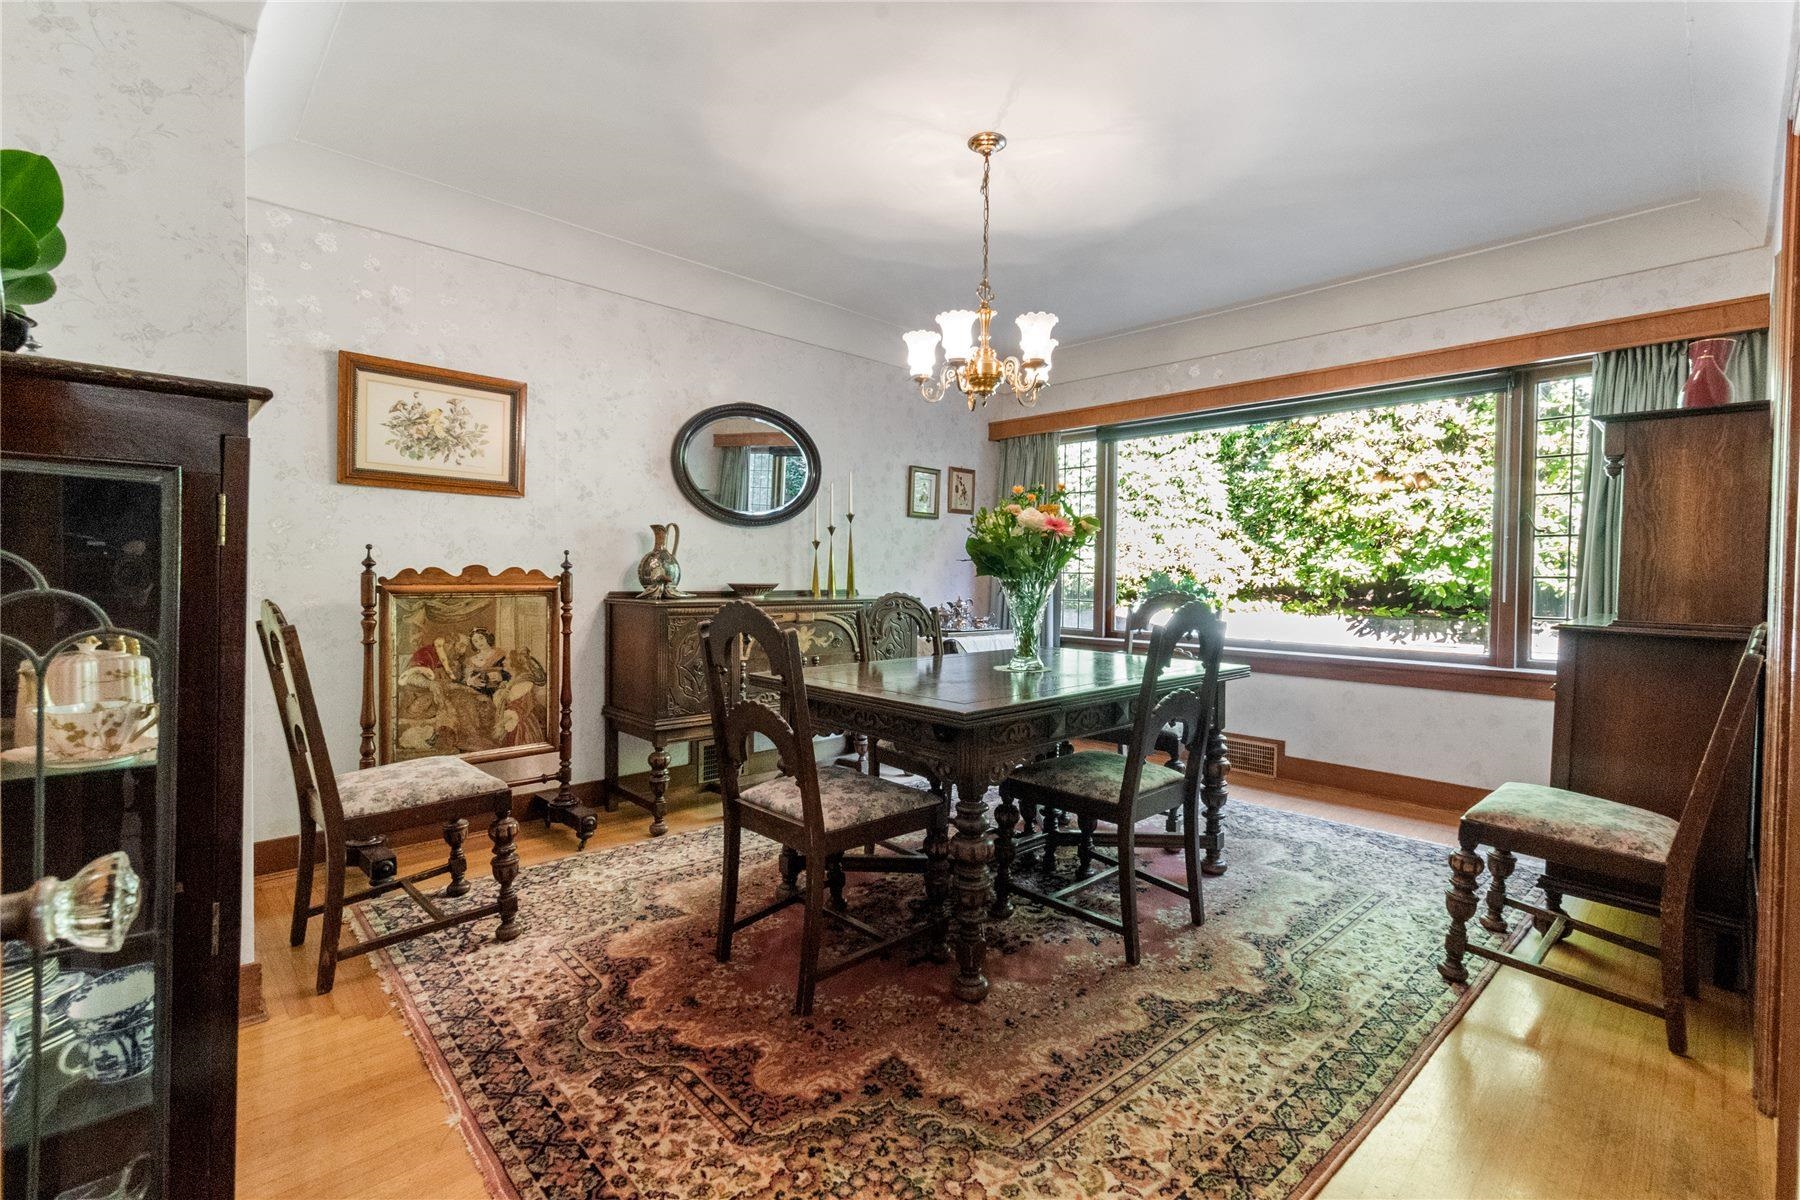 Listing image of 3870 LONSDALE AVENUE